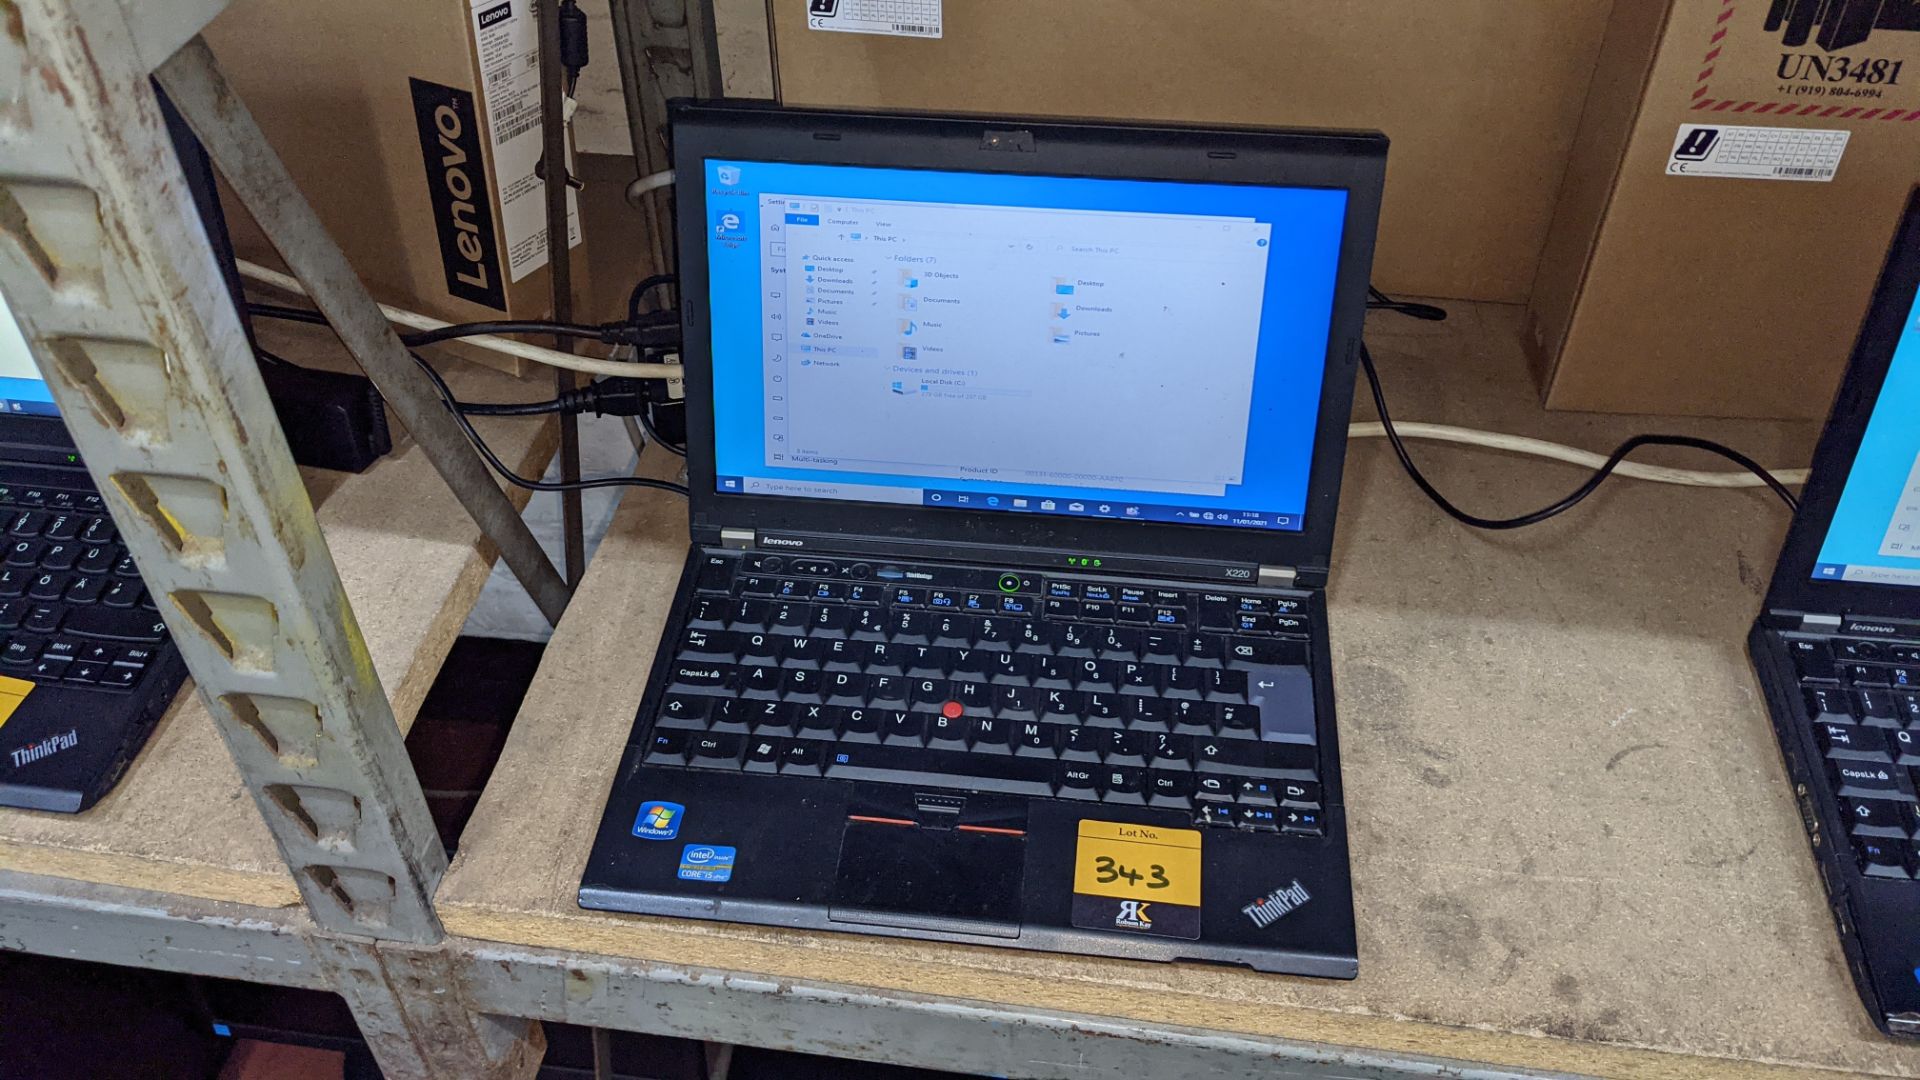 Lenovo X220 notebook computer with Intel Core i5-2520M CPU@2.5GHz, 4Gb RAM, 320Gb hard drive etc. in